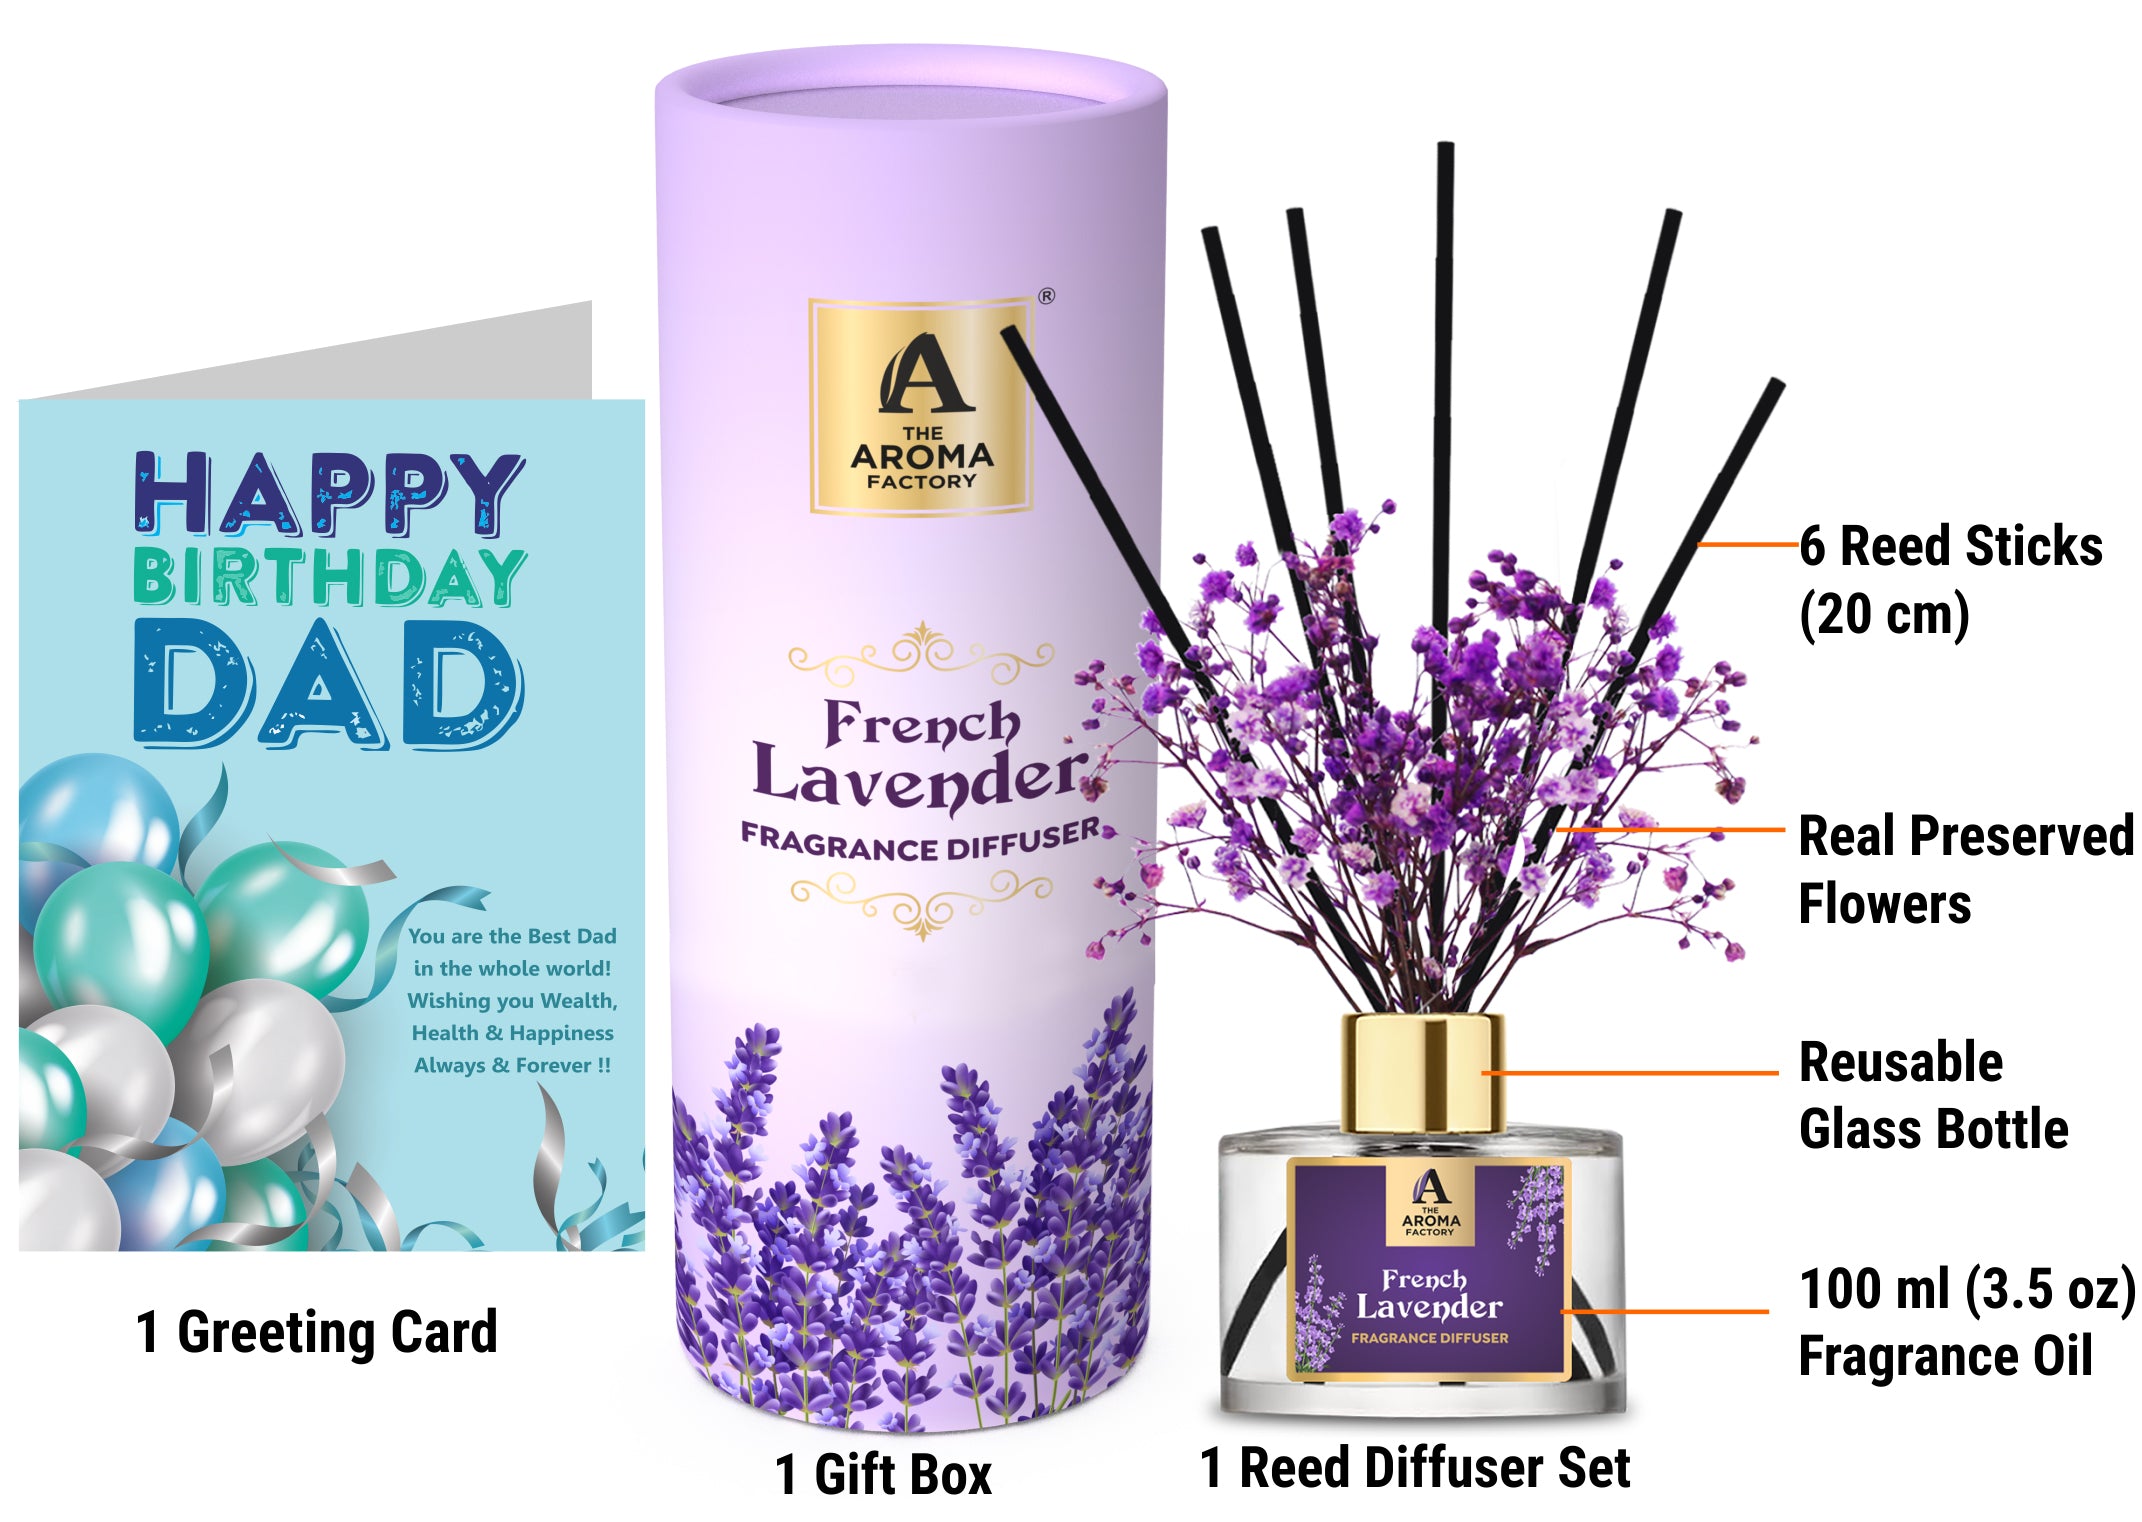 The Aroma Factory Happy Birthday Dad Papa Father Gift with Card, French Lavender Fragrance Reed Diffuser Set (1 Box + 1 Card)